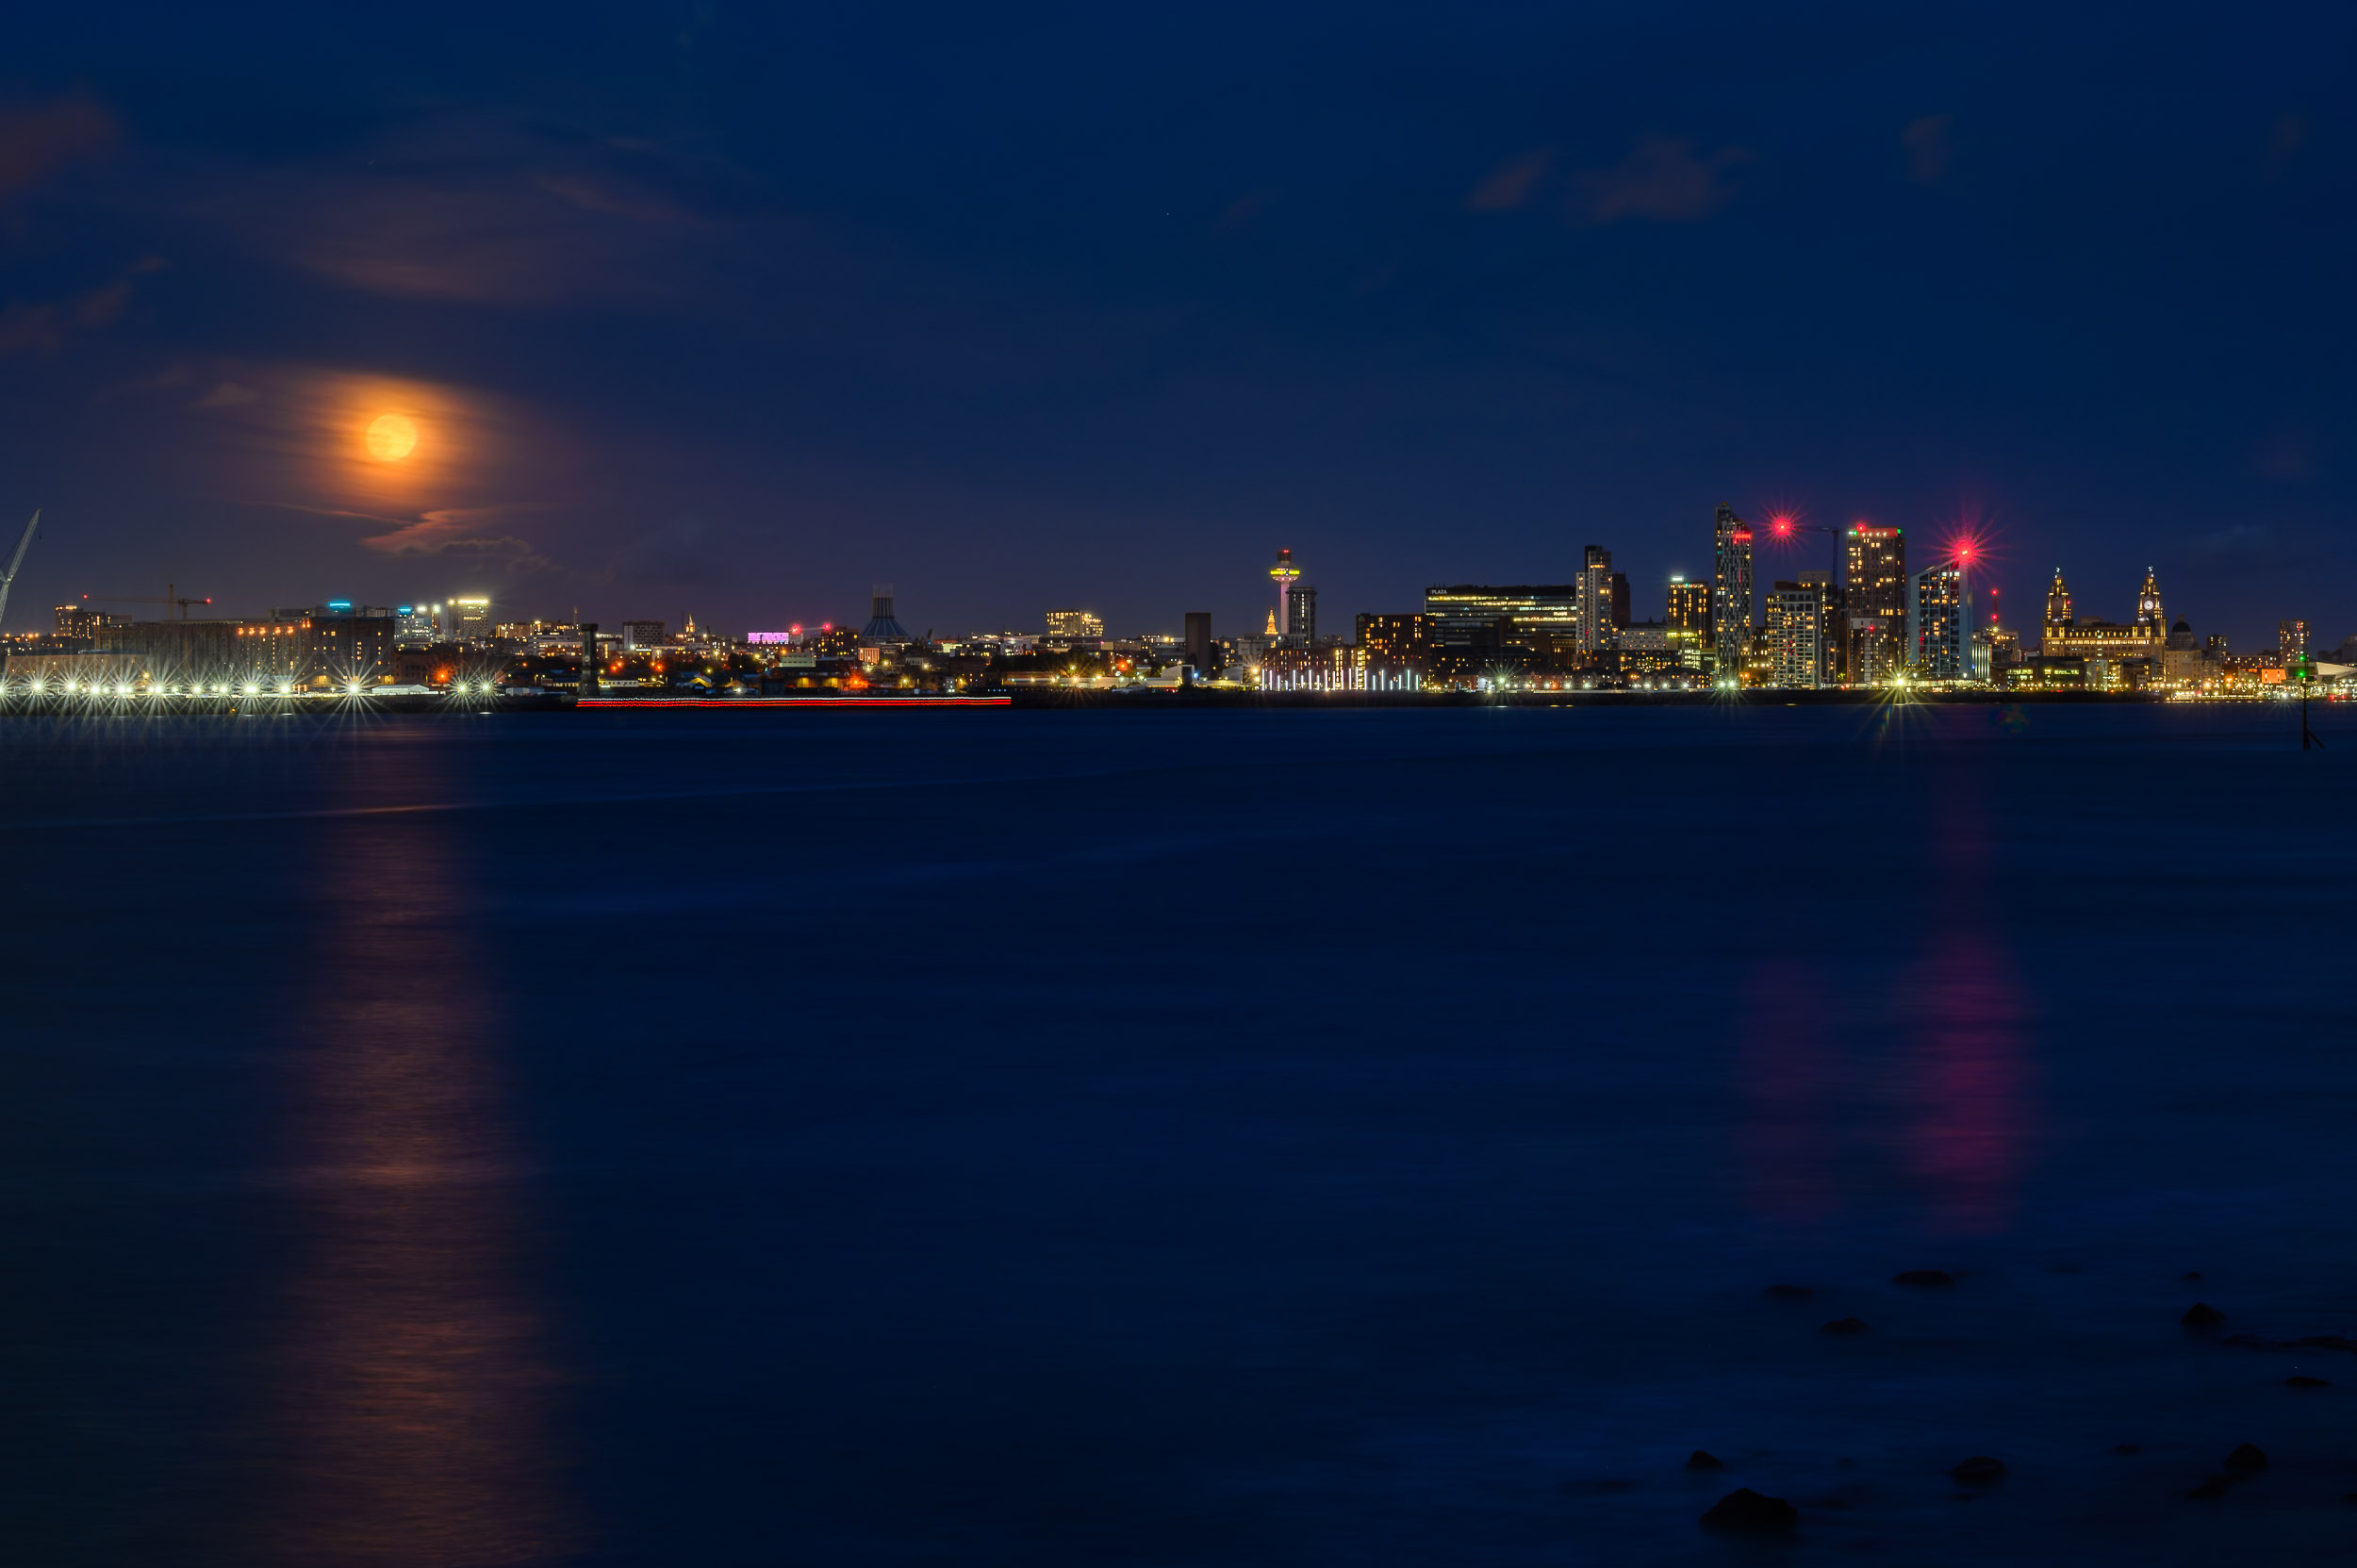 Super blue moon rises through the clouds over the Liverpool waterfront.